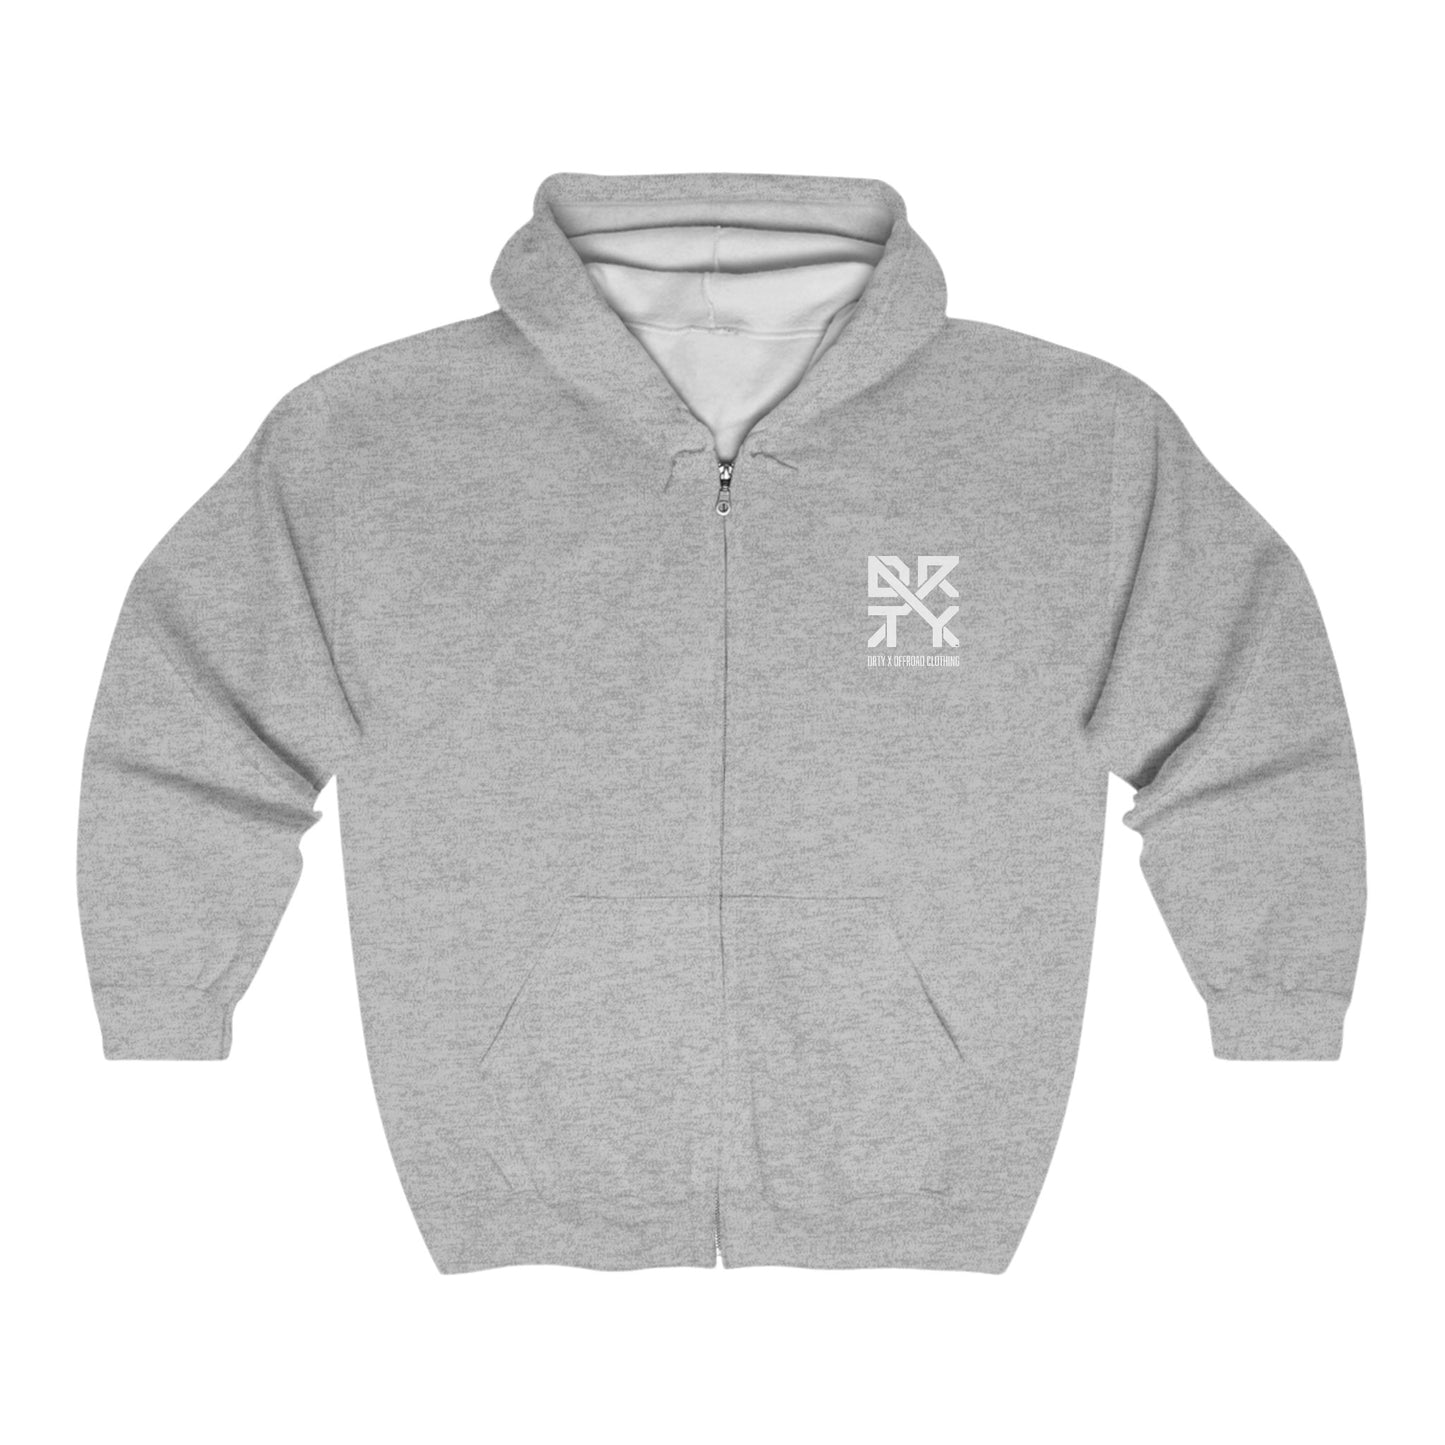 This image showcases the front view of a long sleeve hooded sweatshirt with a DRTY X Logo on the top left chest.